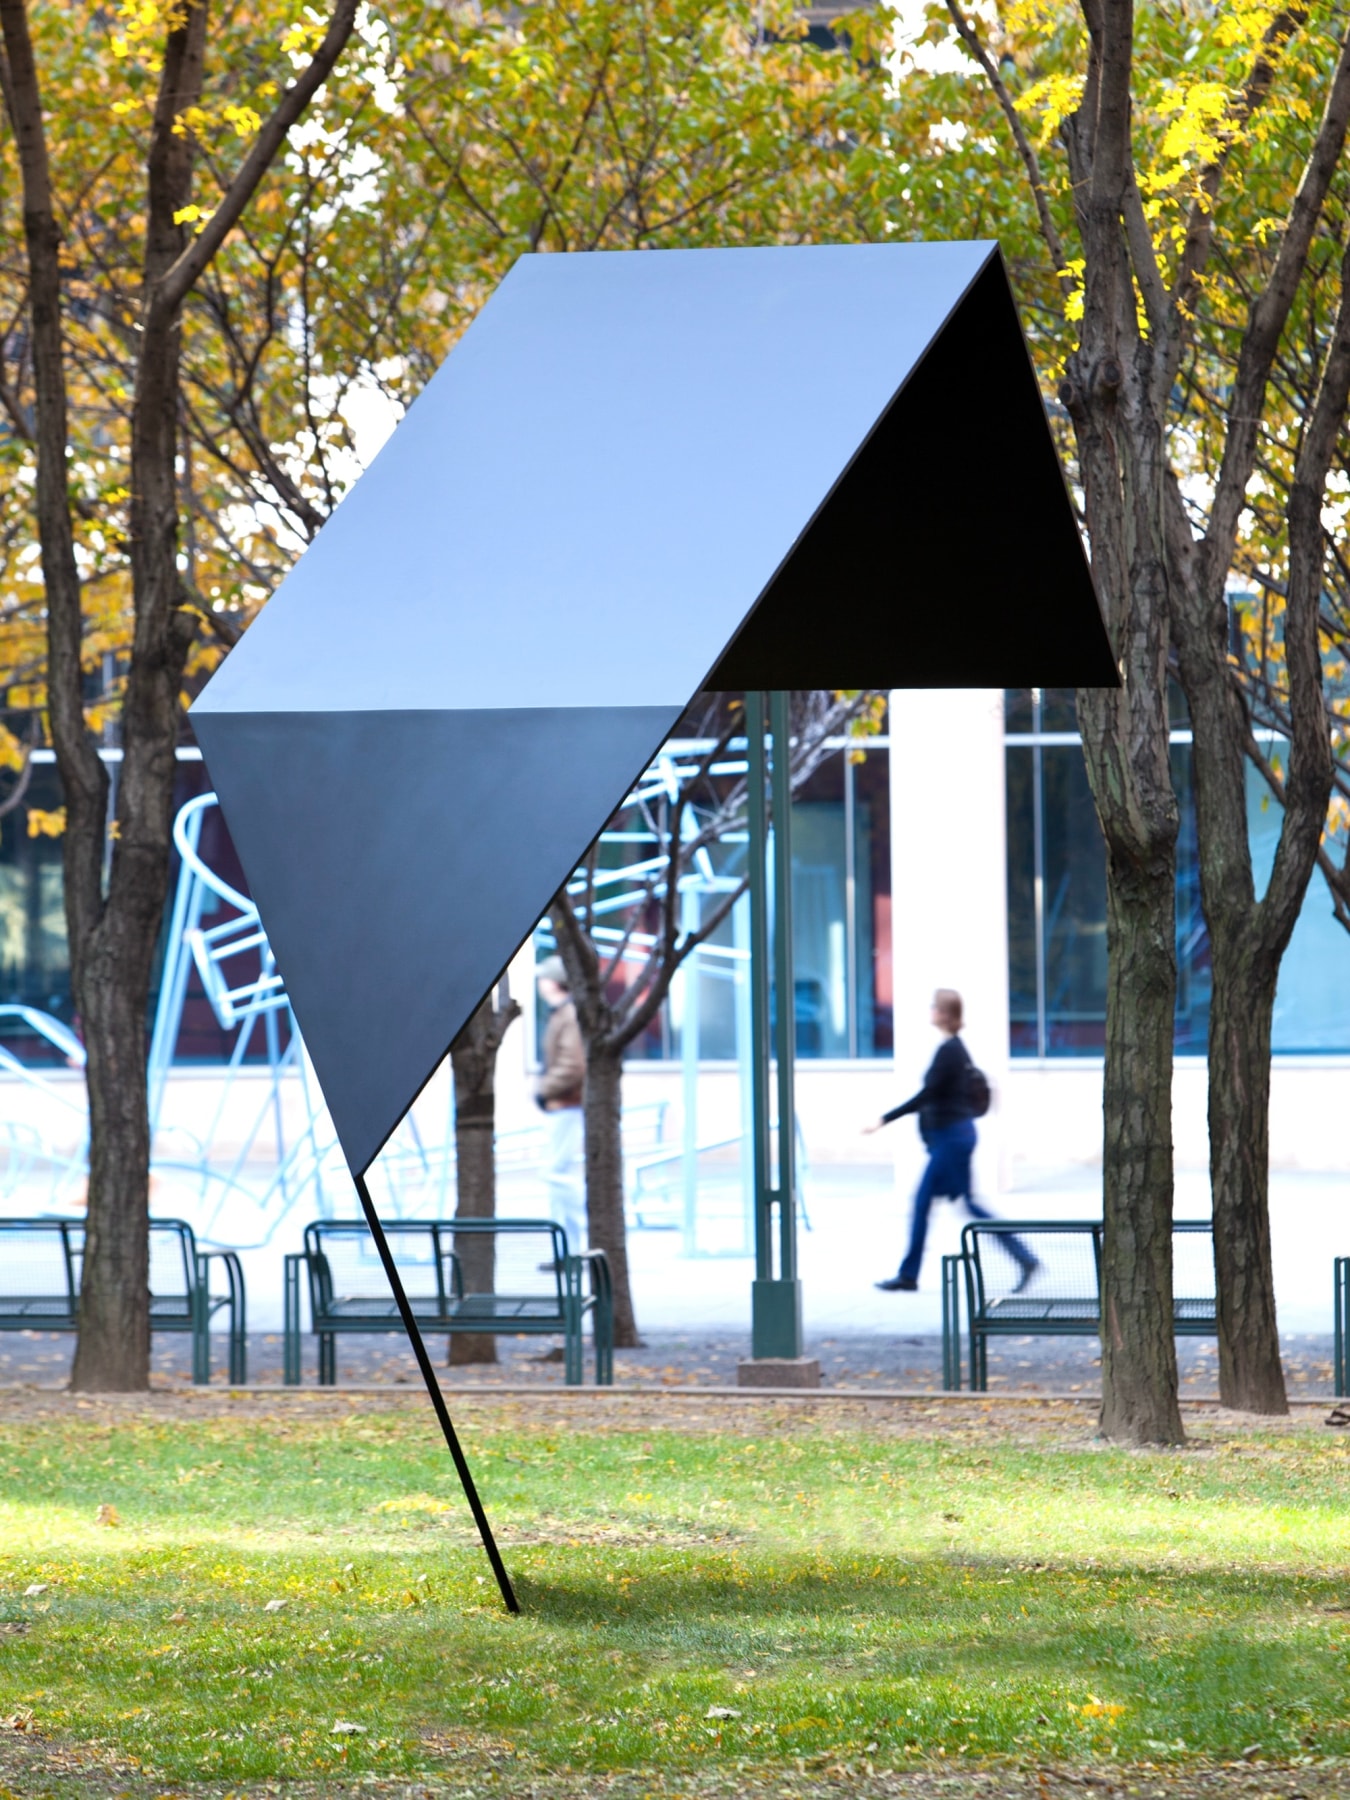 Erin Shirreff, Sculpture for Snow, 2011, painted aluminum, 11 3/8 x 4 1/2 x 9 1/2 feet, in&amp;nbsp;A Promise Is a Cloud, MetroTech Center, Brooklyn, November 5, 2011&amp;ndash;September 14, 2012, presenetd by the Public Art Fund. Photo credit (this image and the follwoing three): James Ewing, Courtesy Public Art Fund.&amp;nbsp;